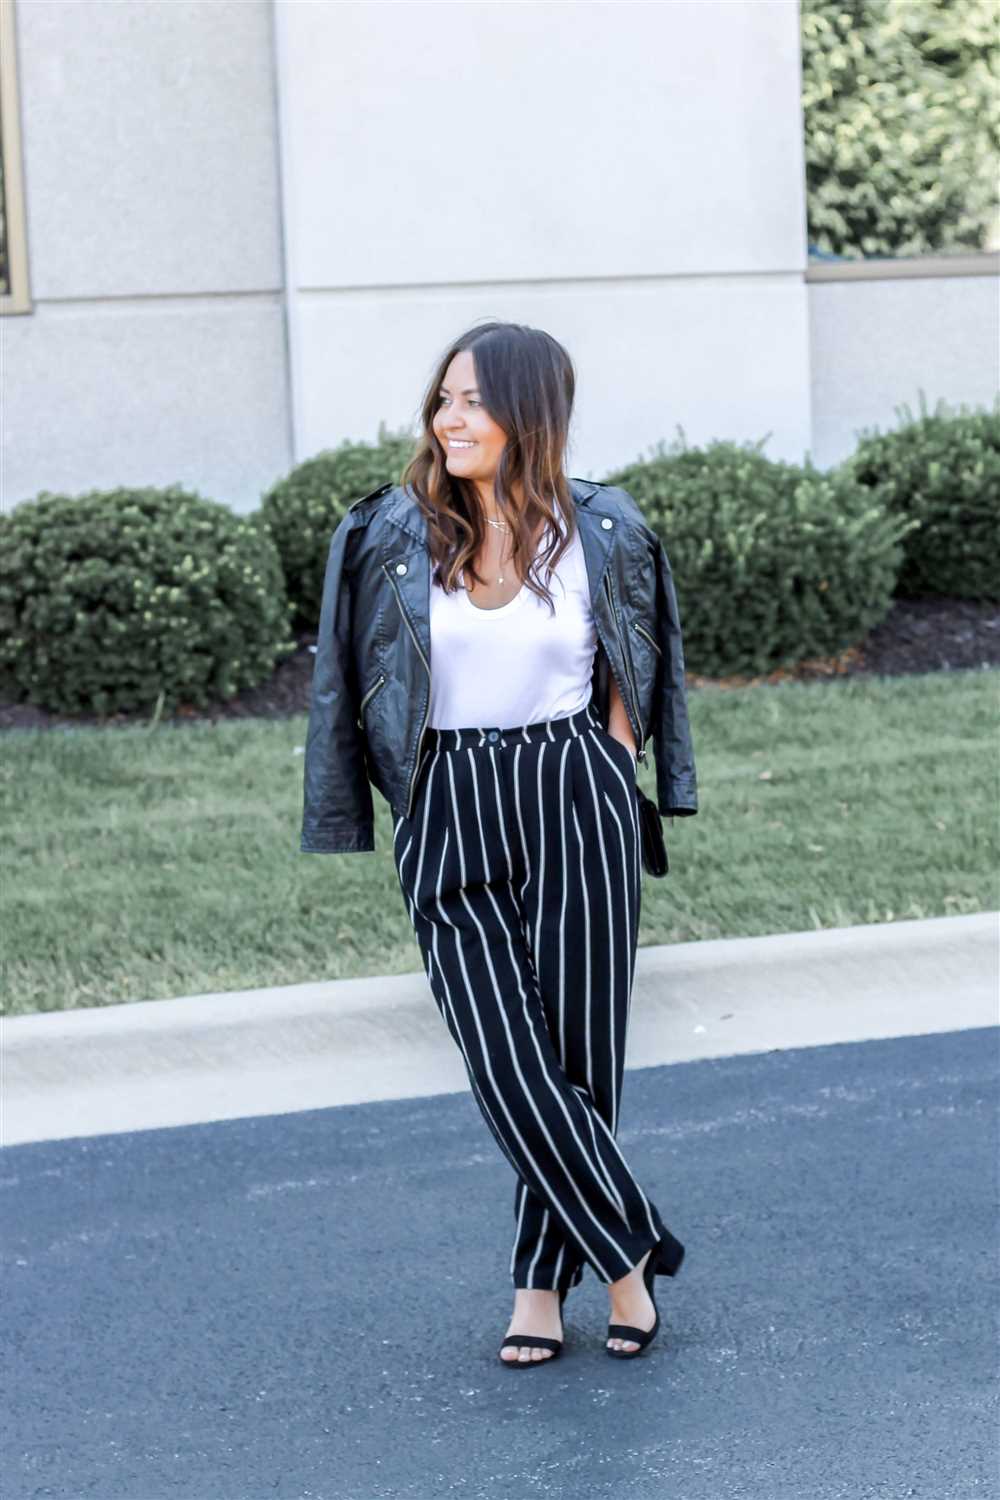 Pairing black and white striped pants with different tops and accessories